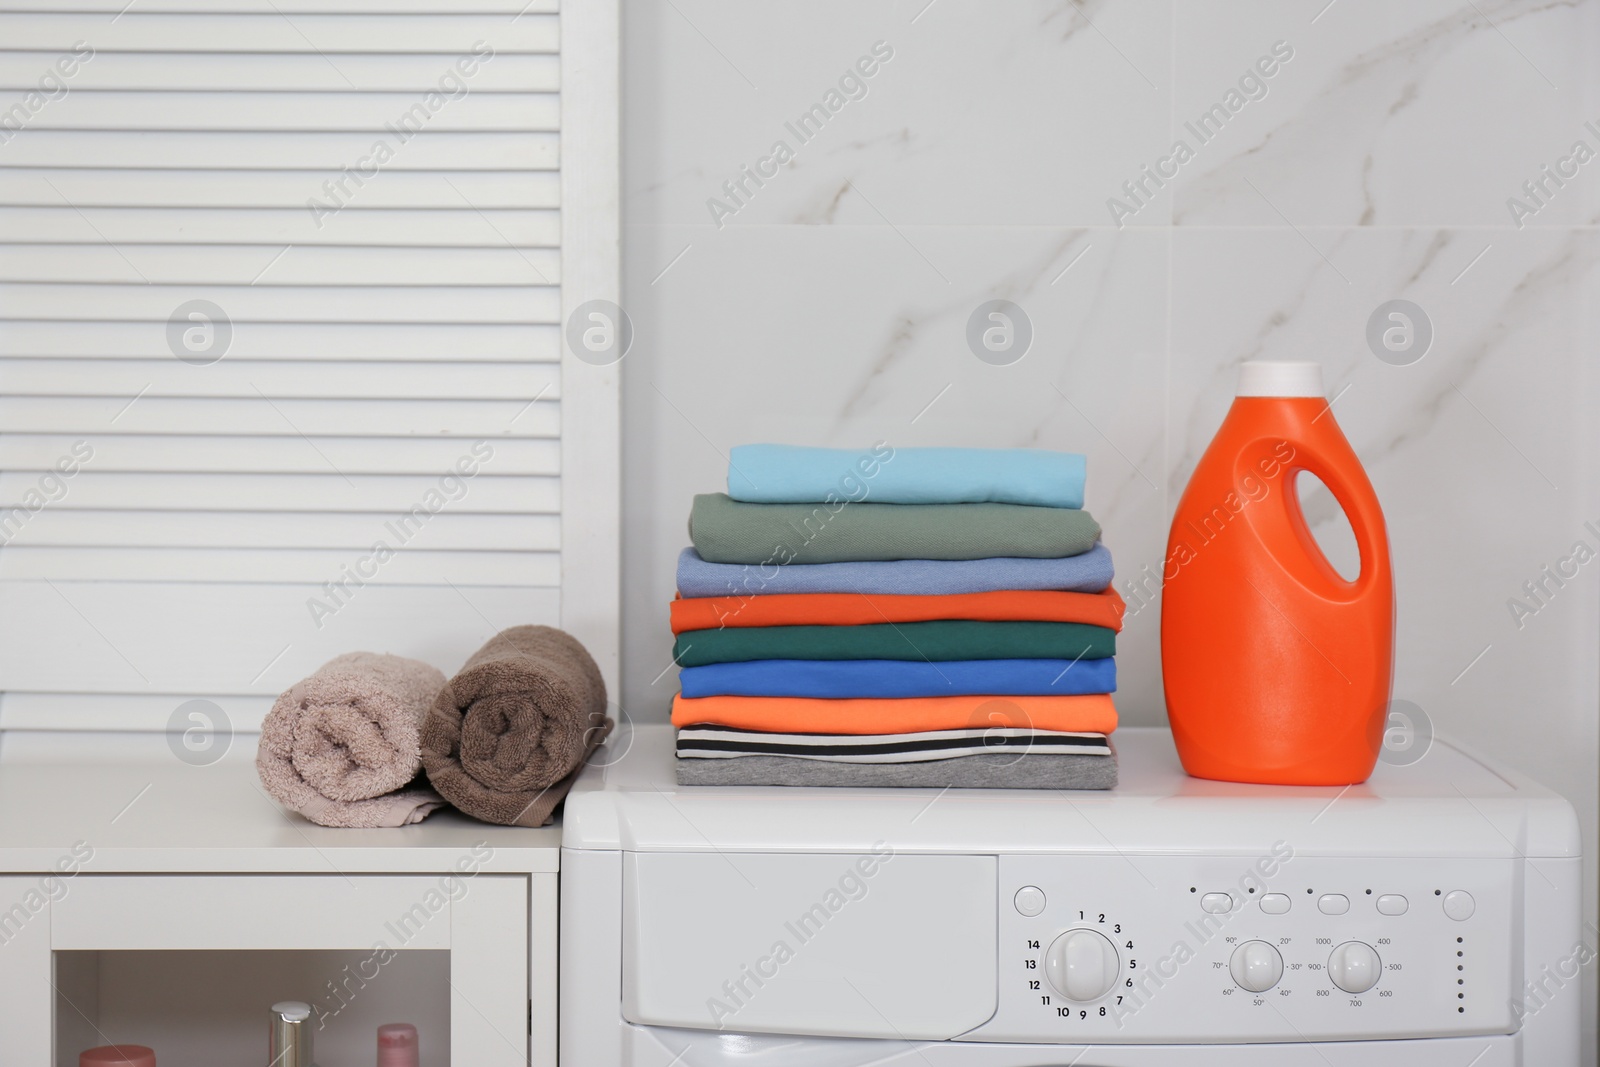 Photo of Fresh laundry and detergent on washing machine in laundry room